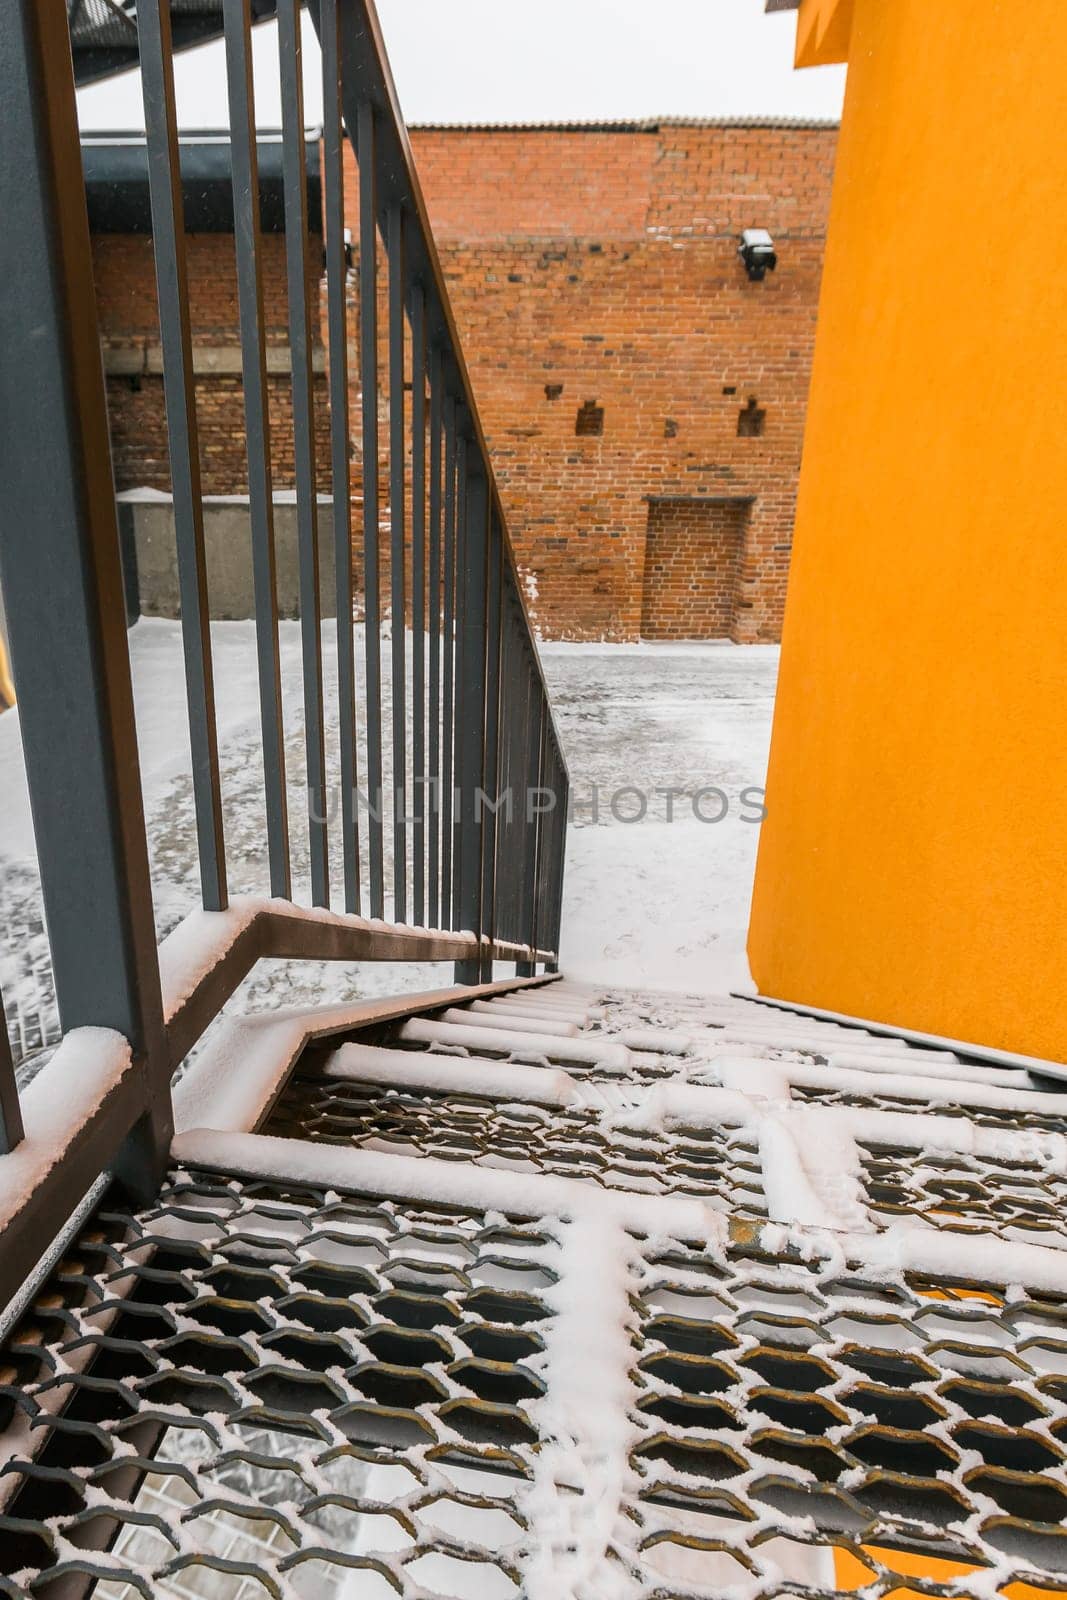 Fire exit stair of large factory building in winter season with snow. Galvanised metal stair step. by Satura86